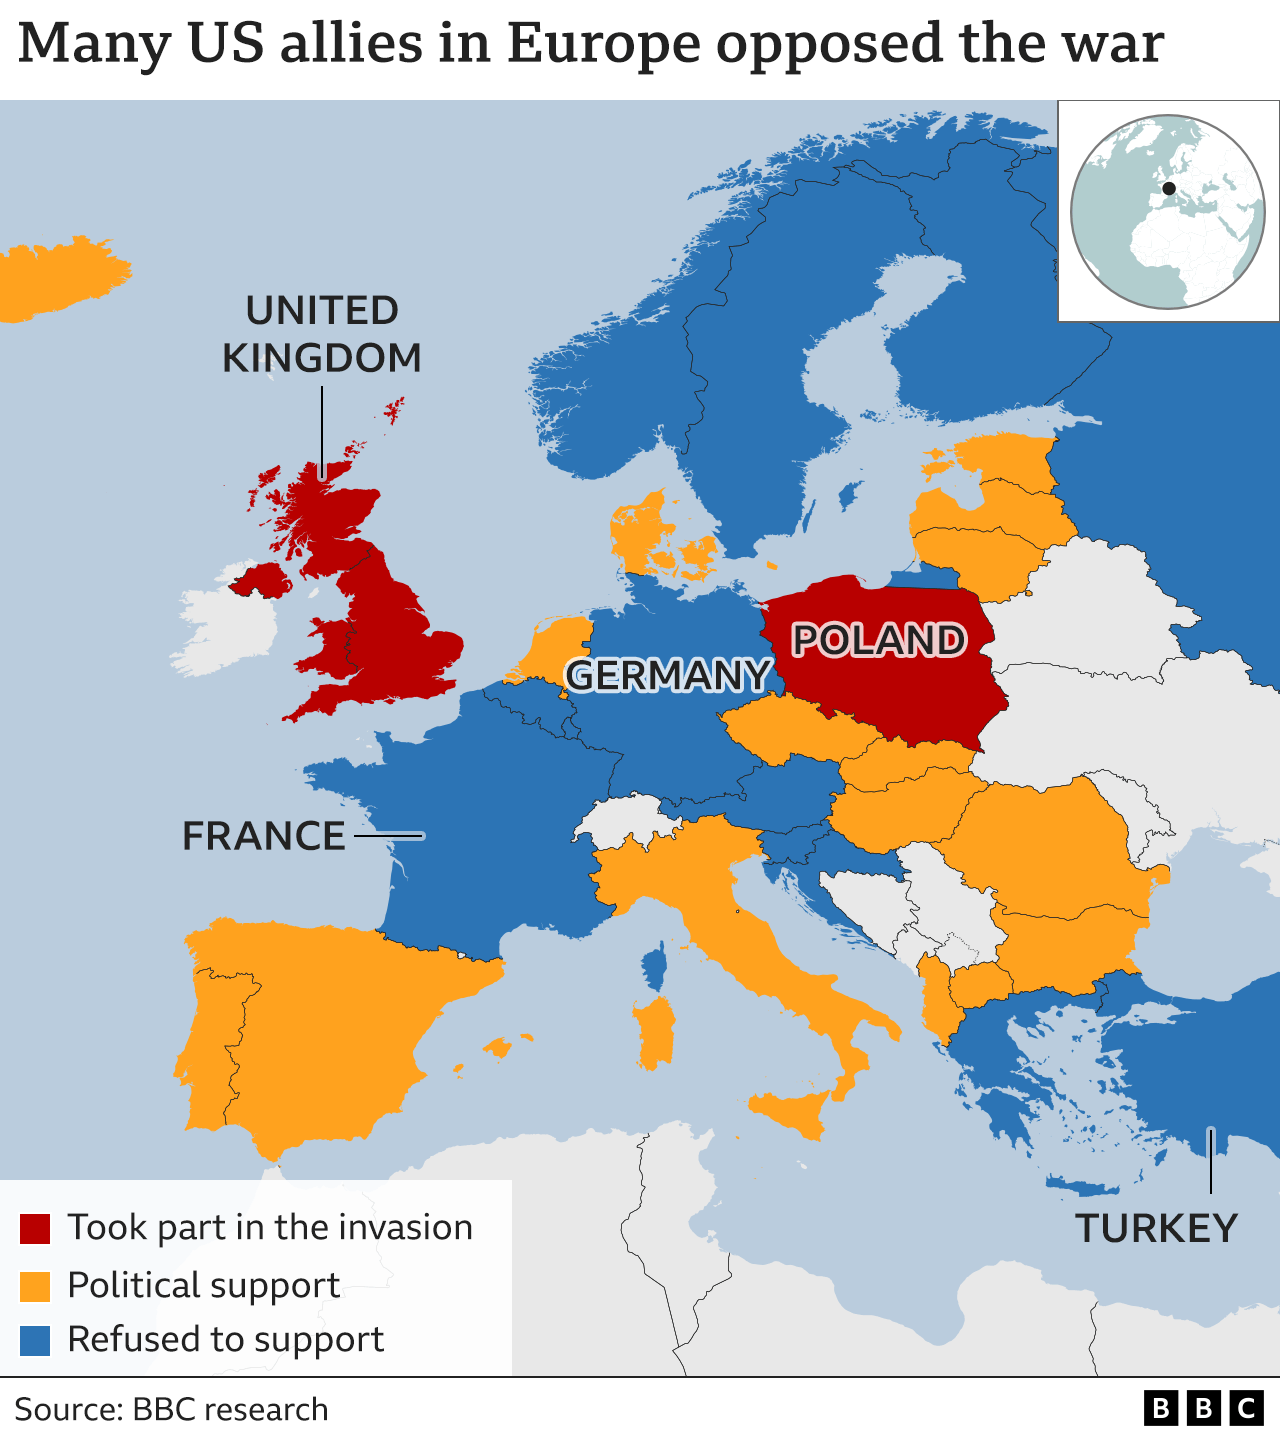 Map showing European countries which took part in the invasion of Iraq, which supported the invasion, or which opposed it